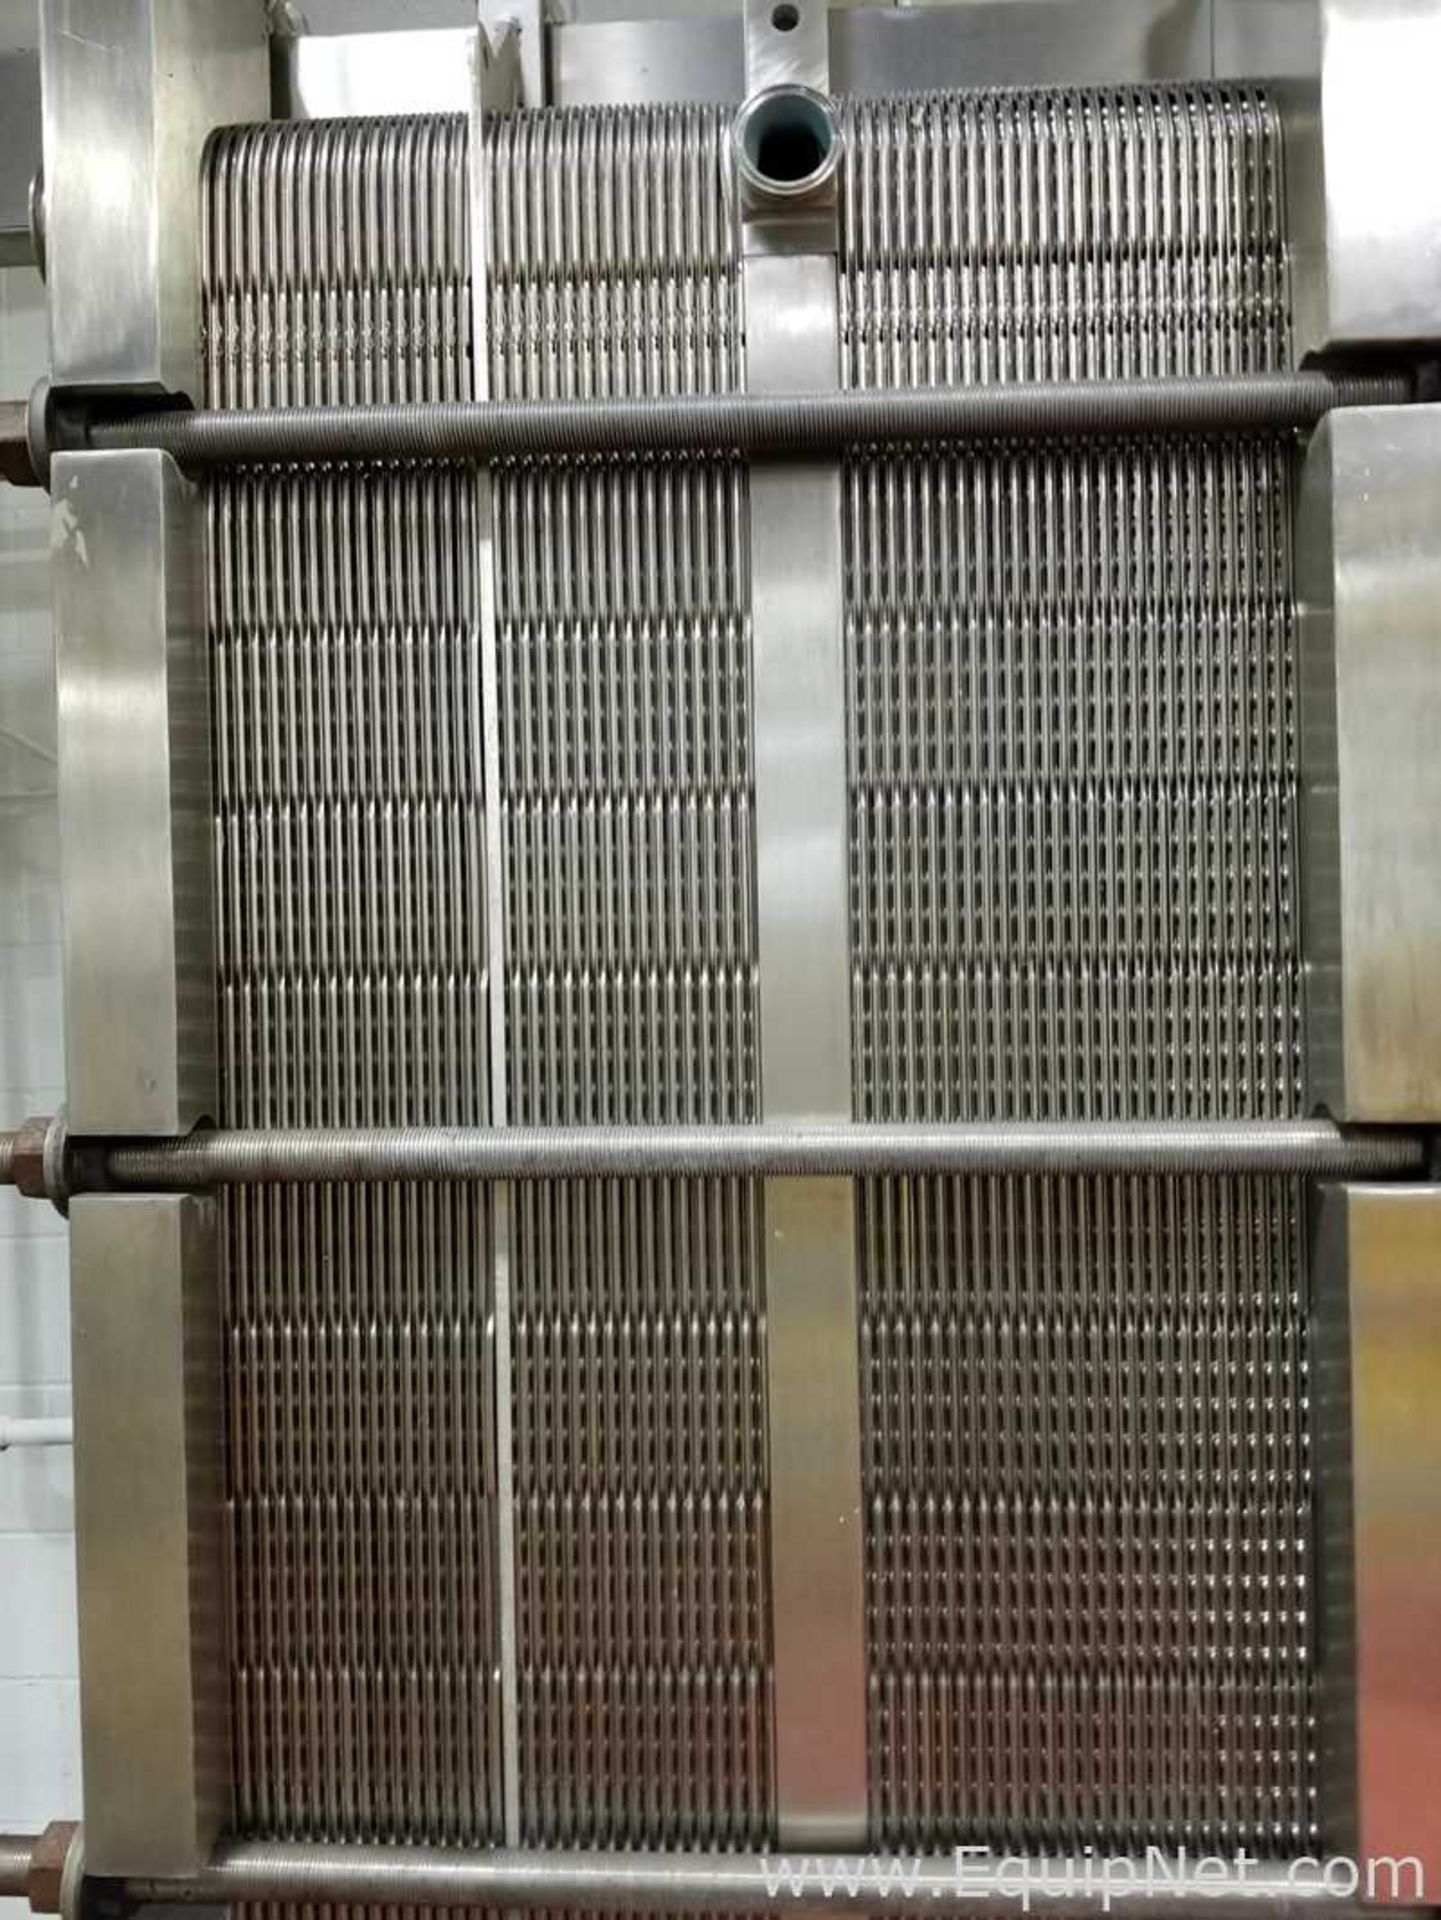 APV R56SH/200 Stainless Steel Plate Heat Exchanger Frame Size Number 2 - Image 2 of 5